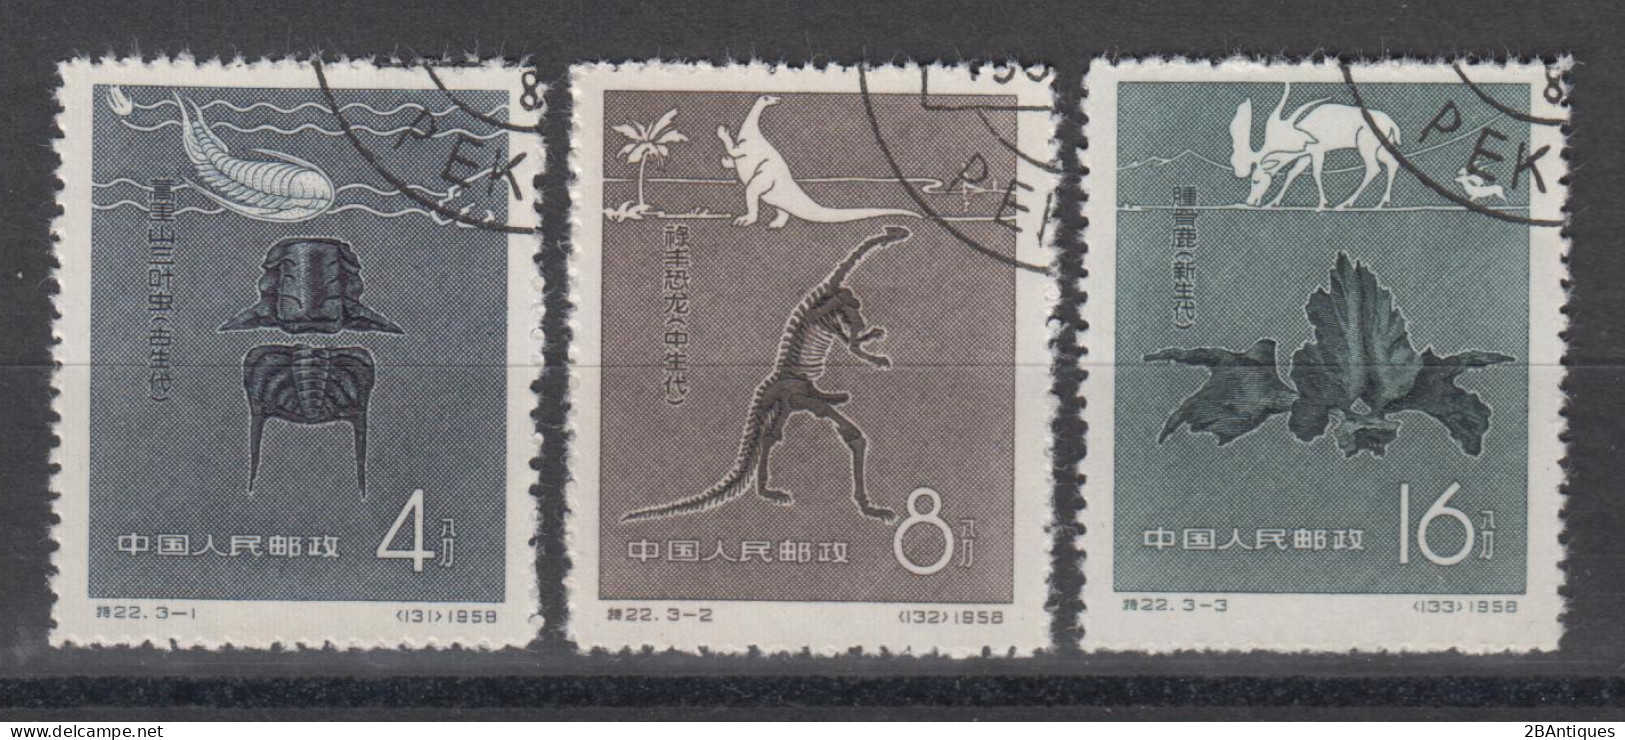 PR CHINA 1958 - Chinese Fossils CTO XF With Very Nice Cancellation! - Used Stamps